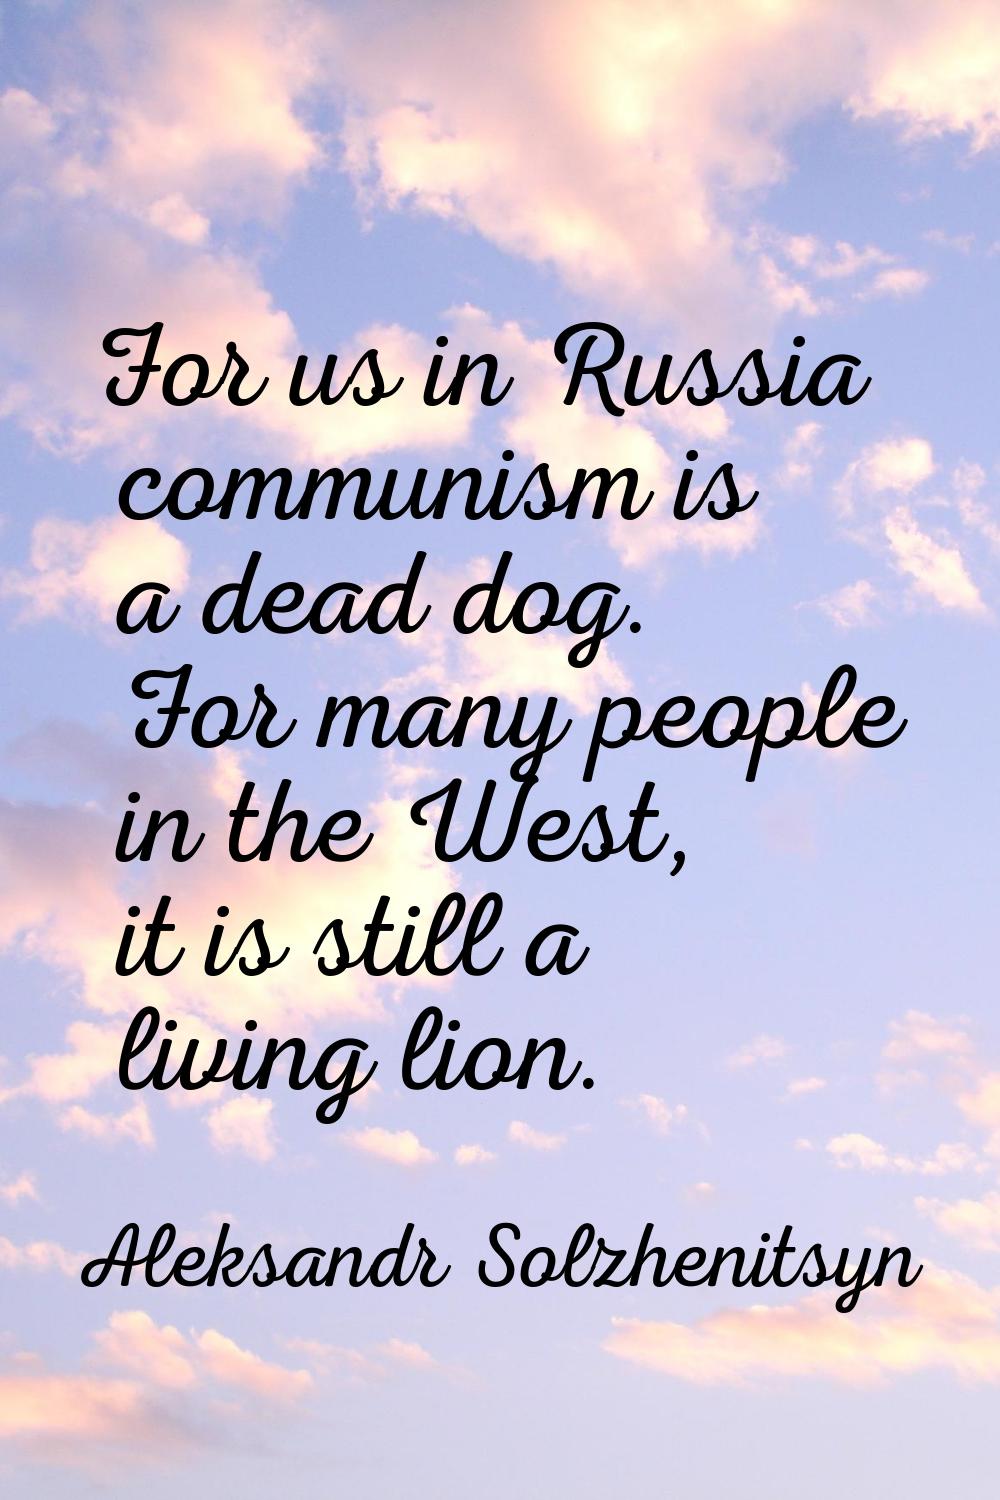 For us in Russia communism is a dead dog. For many people in the West, it is still a living lion.